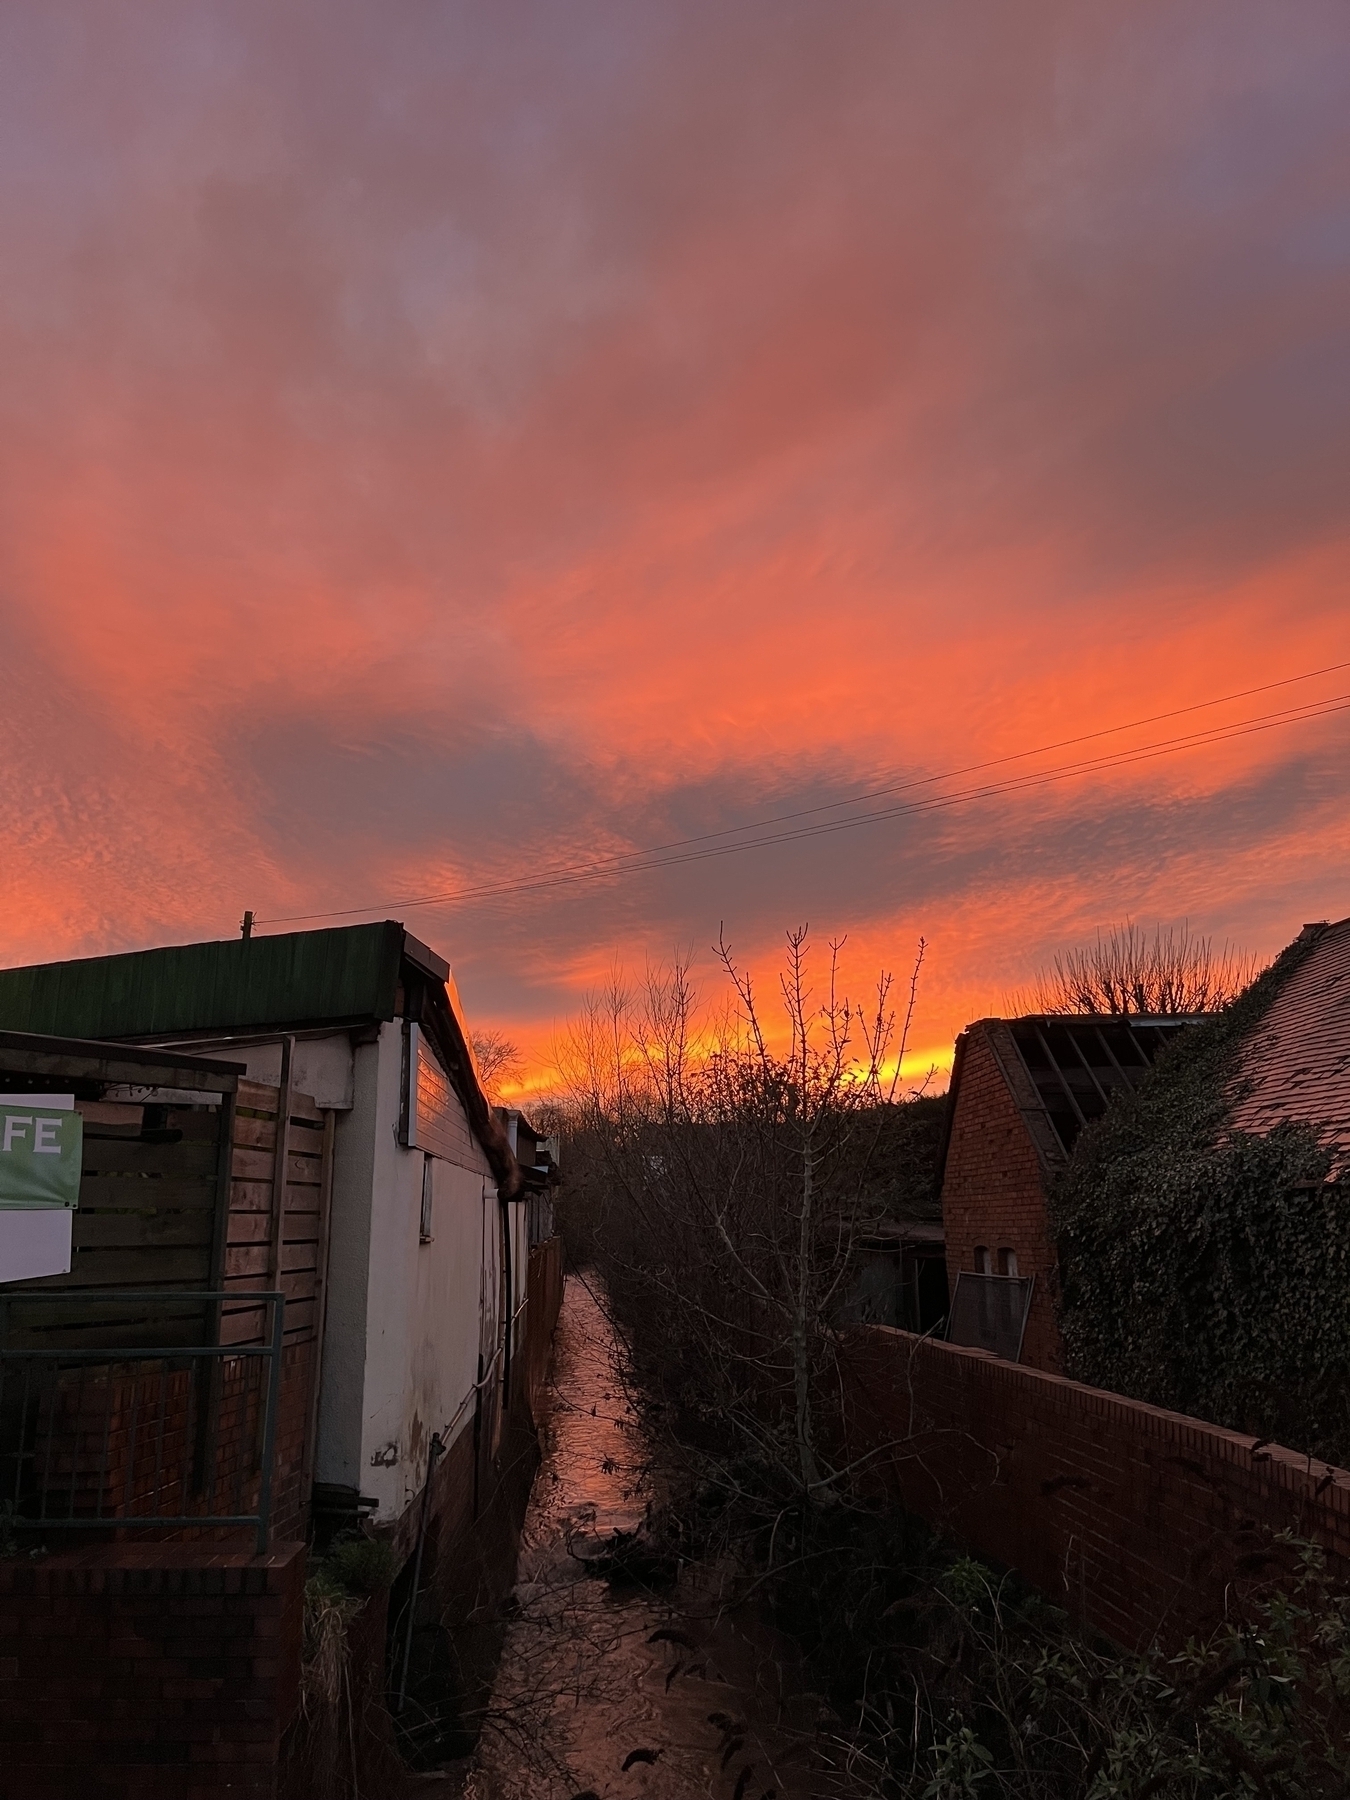 A deep orange and pink sky at sunset, seen reflected in a small stream running behind a row of terraced houses. 